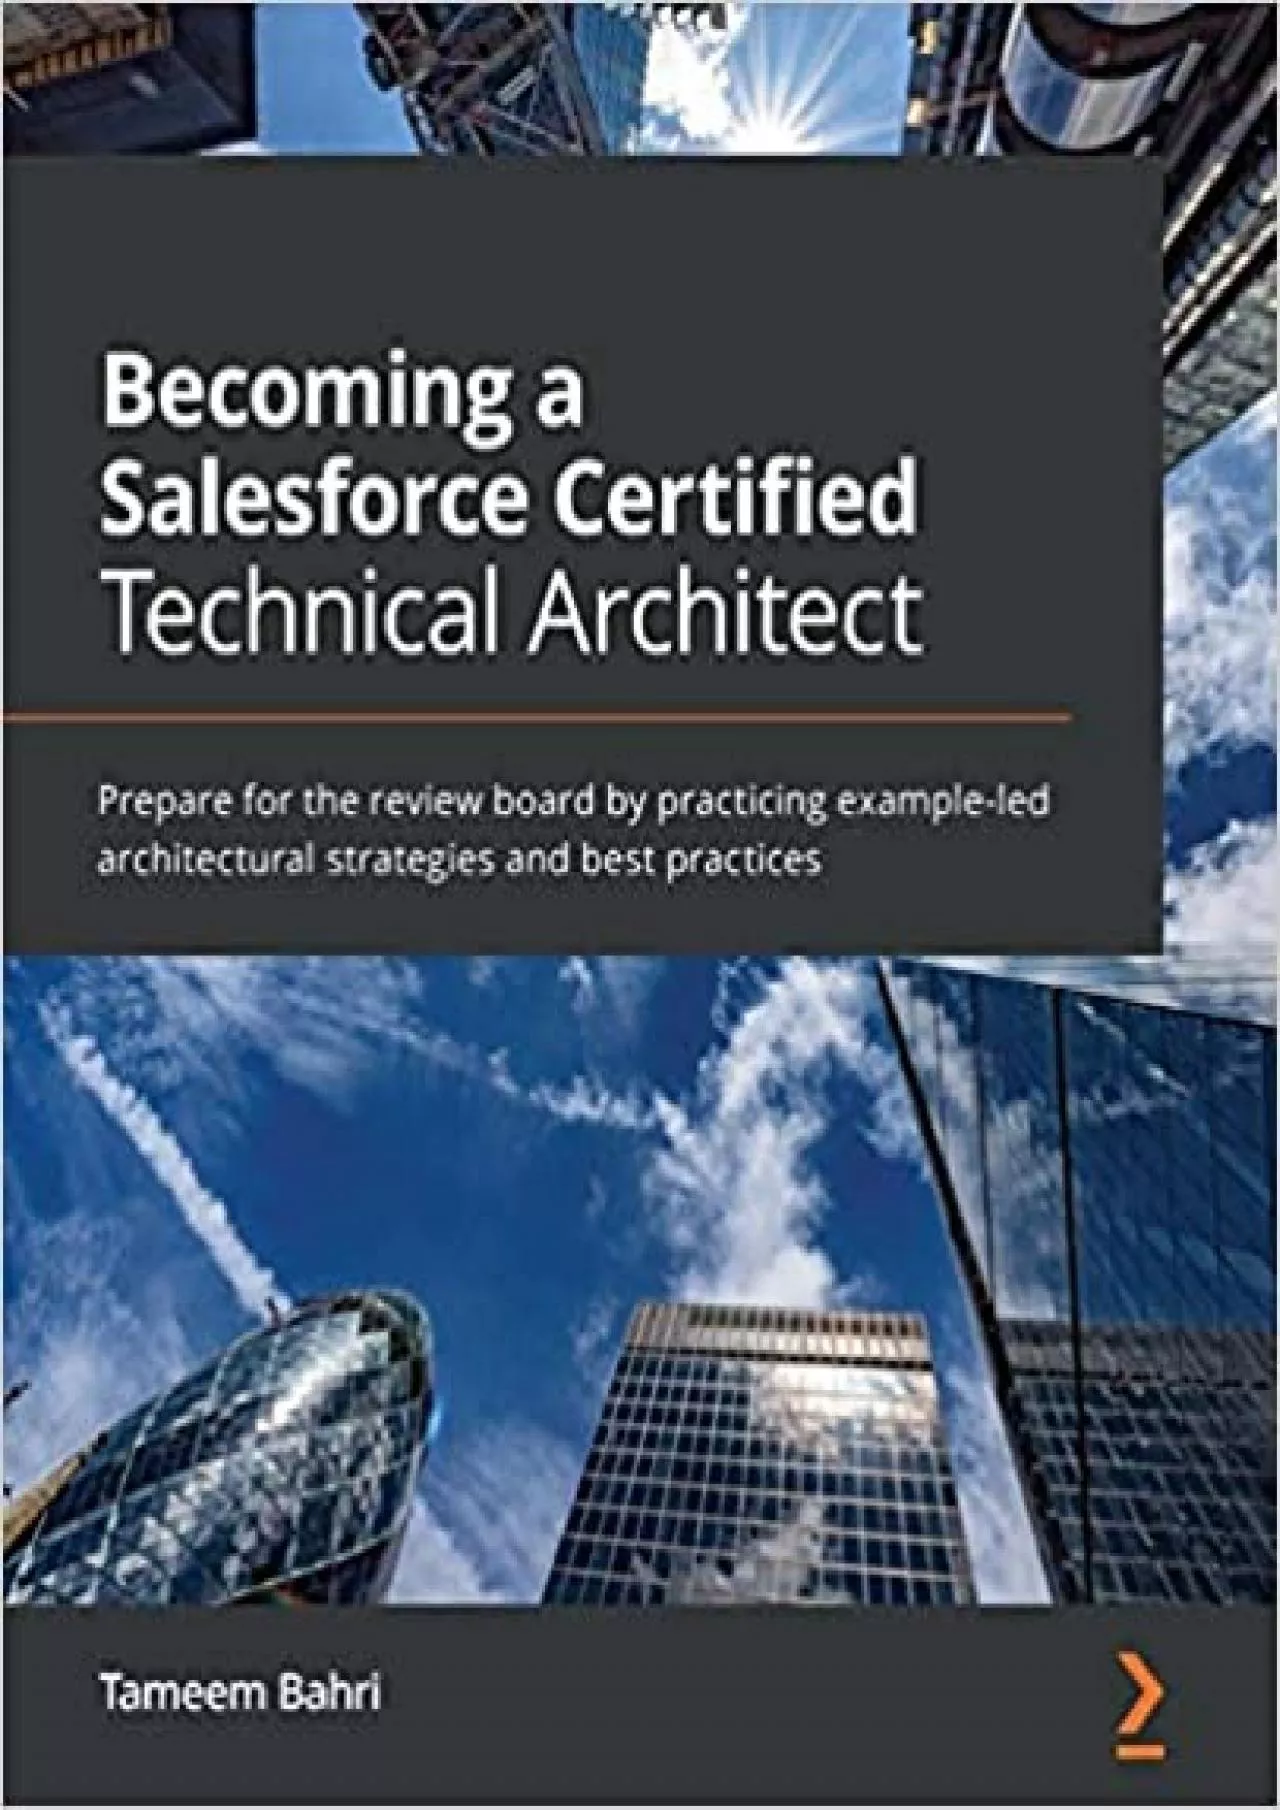 Becoming a Salesforce Certified Technical Architect: Prepare for the review board by practicing